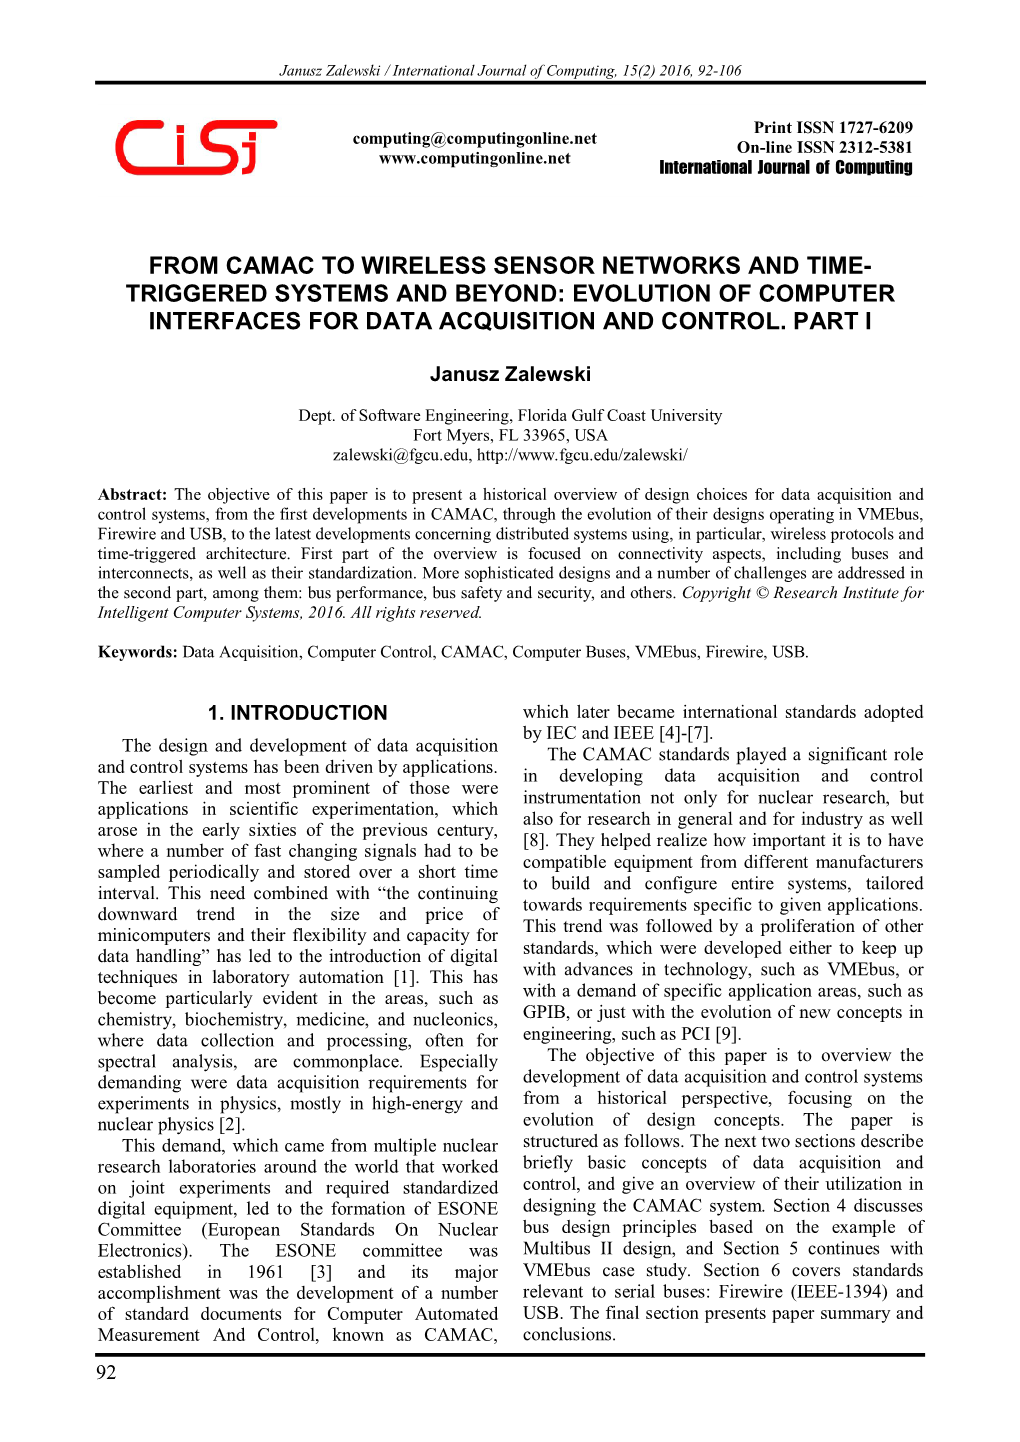 From Camac to Wireless Sensor Networks and Time- Triggered Systems and Beyond: Evolution of Computer Interfaces for Data Acquisition and Control